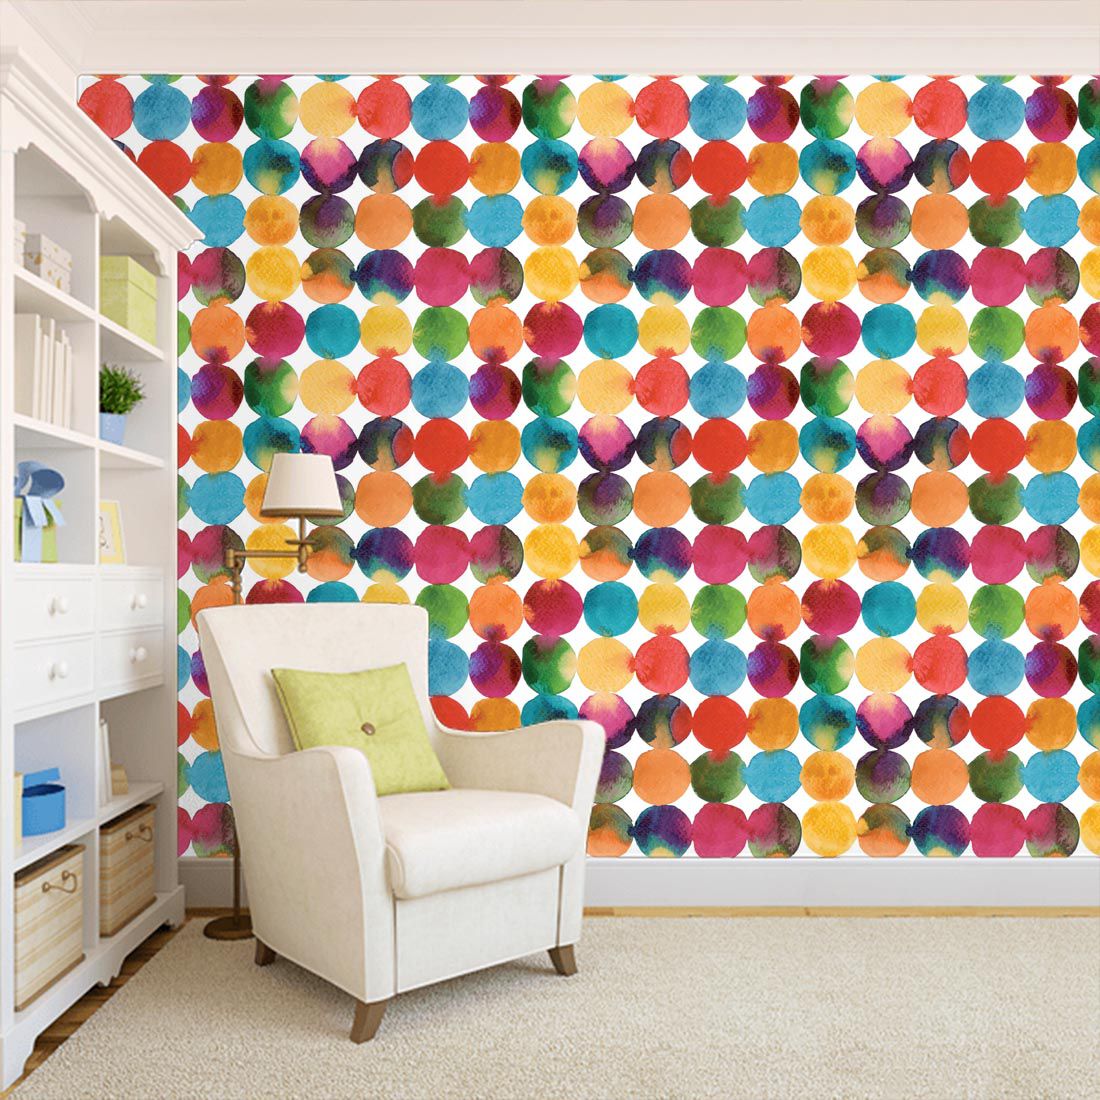 100yellow Vinyl Designs Wallpapers Multicolor Buy 100yellow Vinyl Designs  Wallpapers Multicolor at Best Price in India on Snapdeal